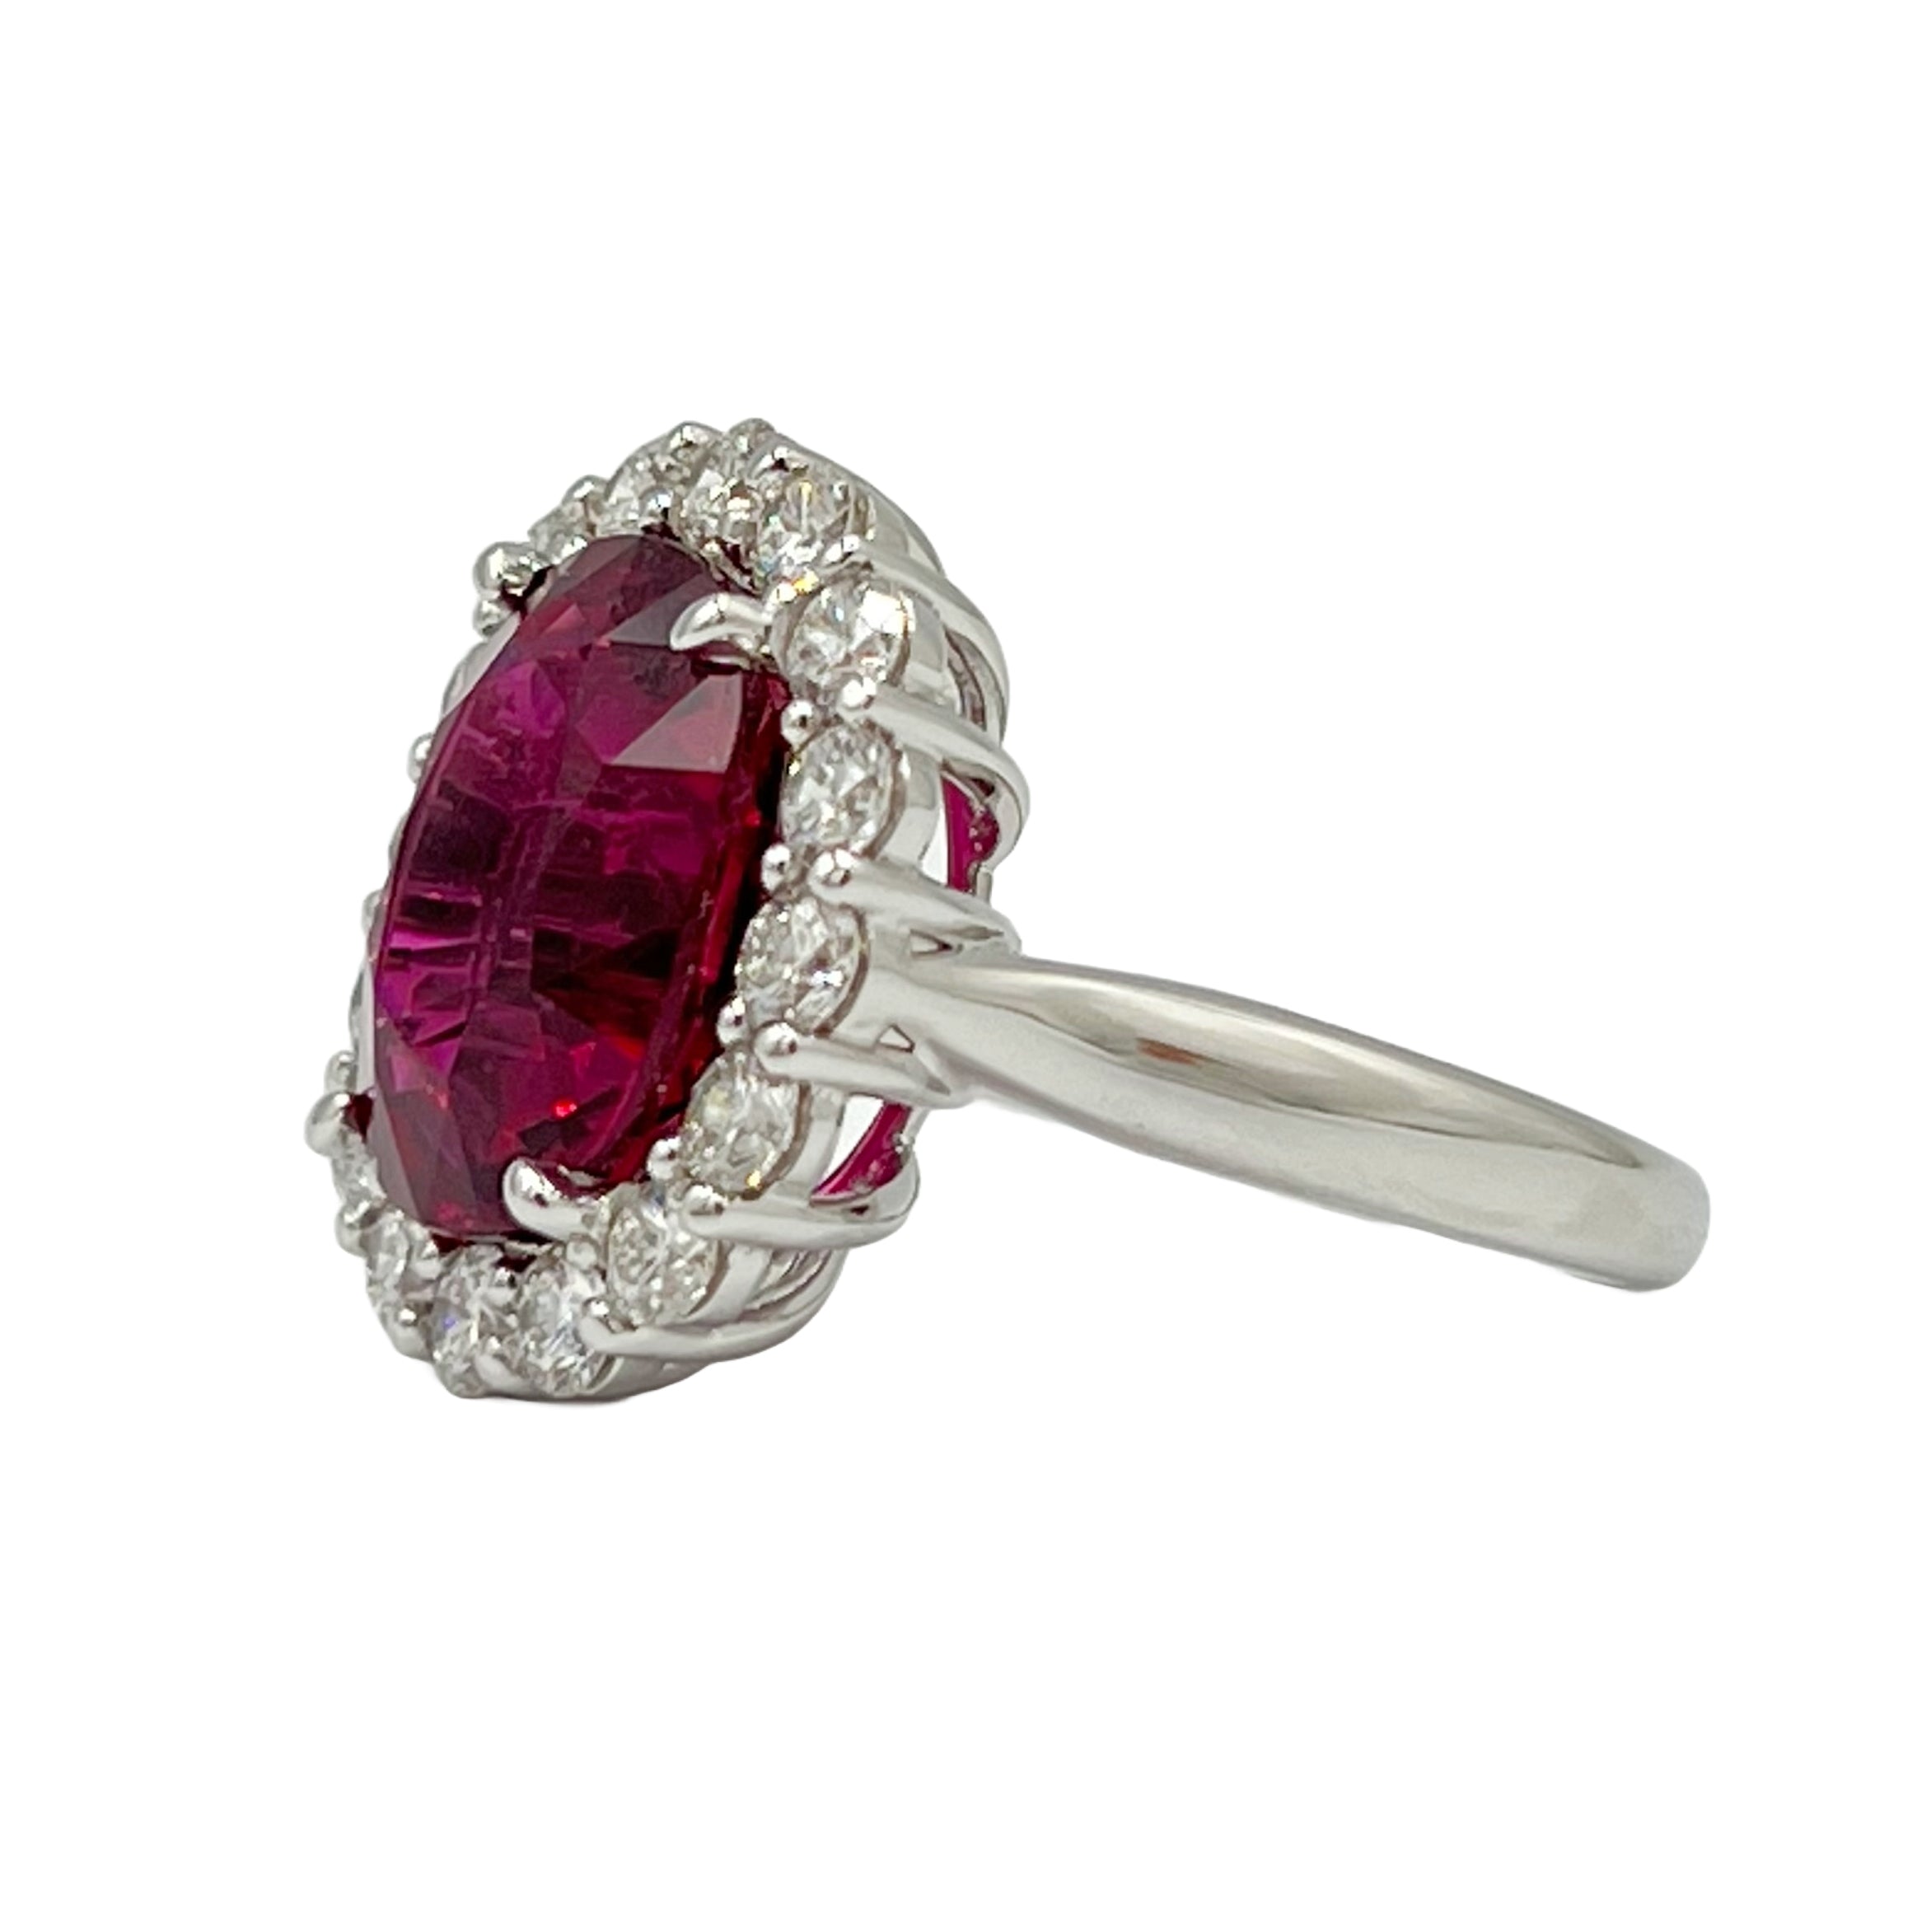 Ring 18KW/6.8G 1RUBL-6.64CT 16RD-1.26CT